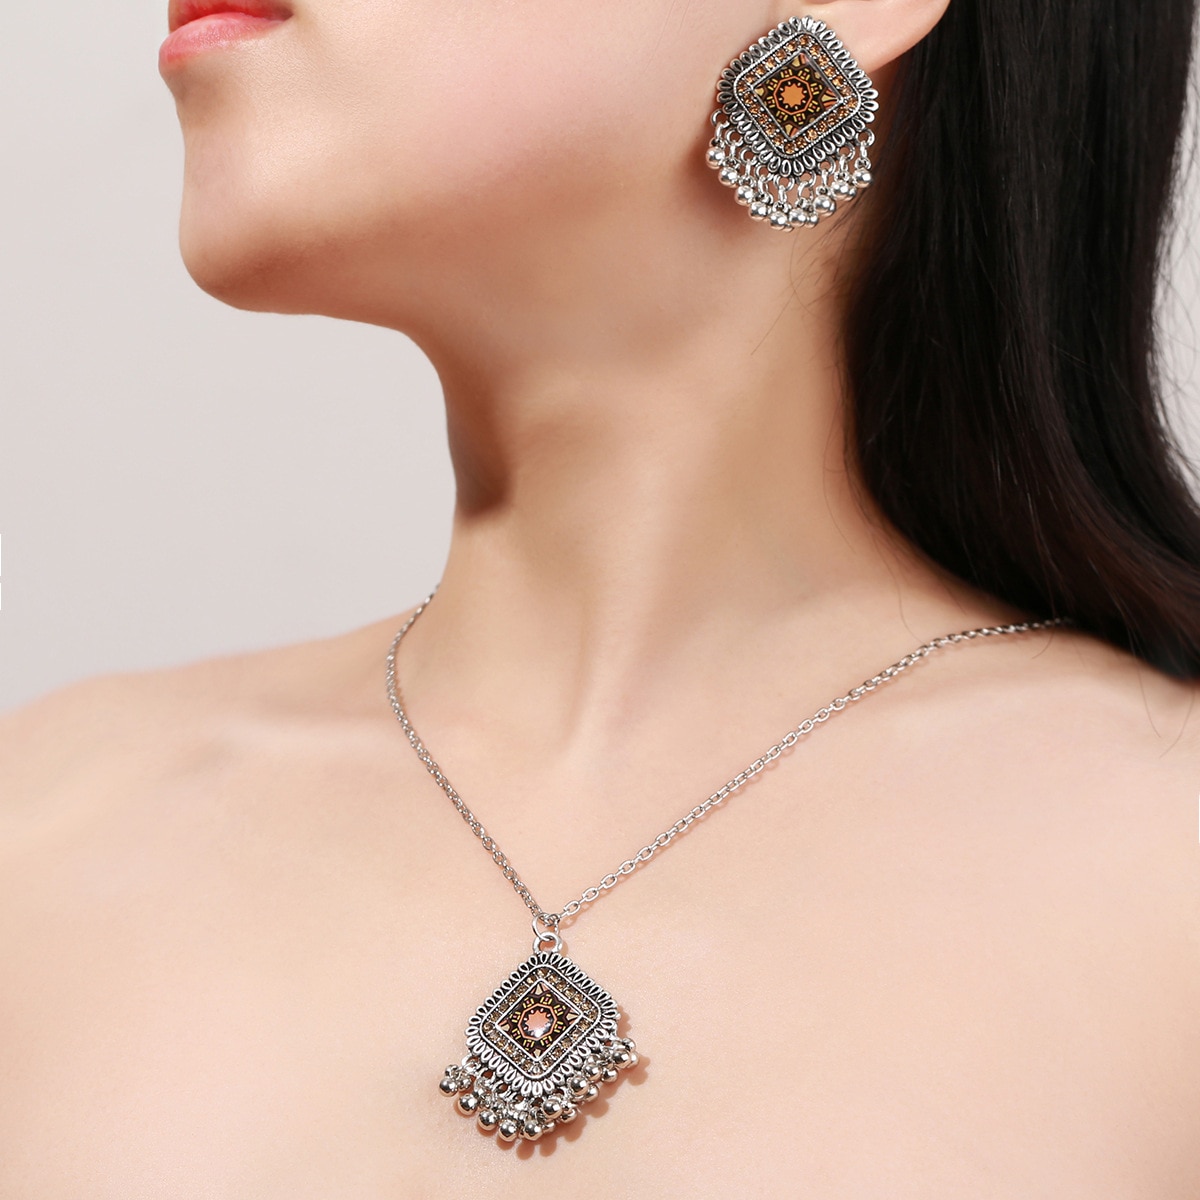 Vintage-Silver-Color-Flower-Jewelry-Sets-For-Women-Bell-Tassel-Necklaces-Earring-Bridal-Afghan-India-3256804350137978-2